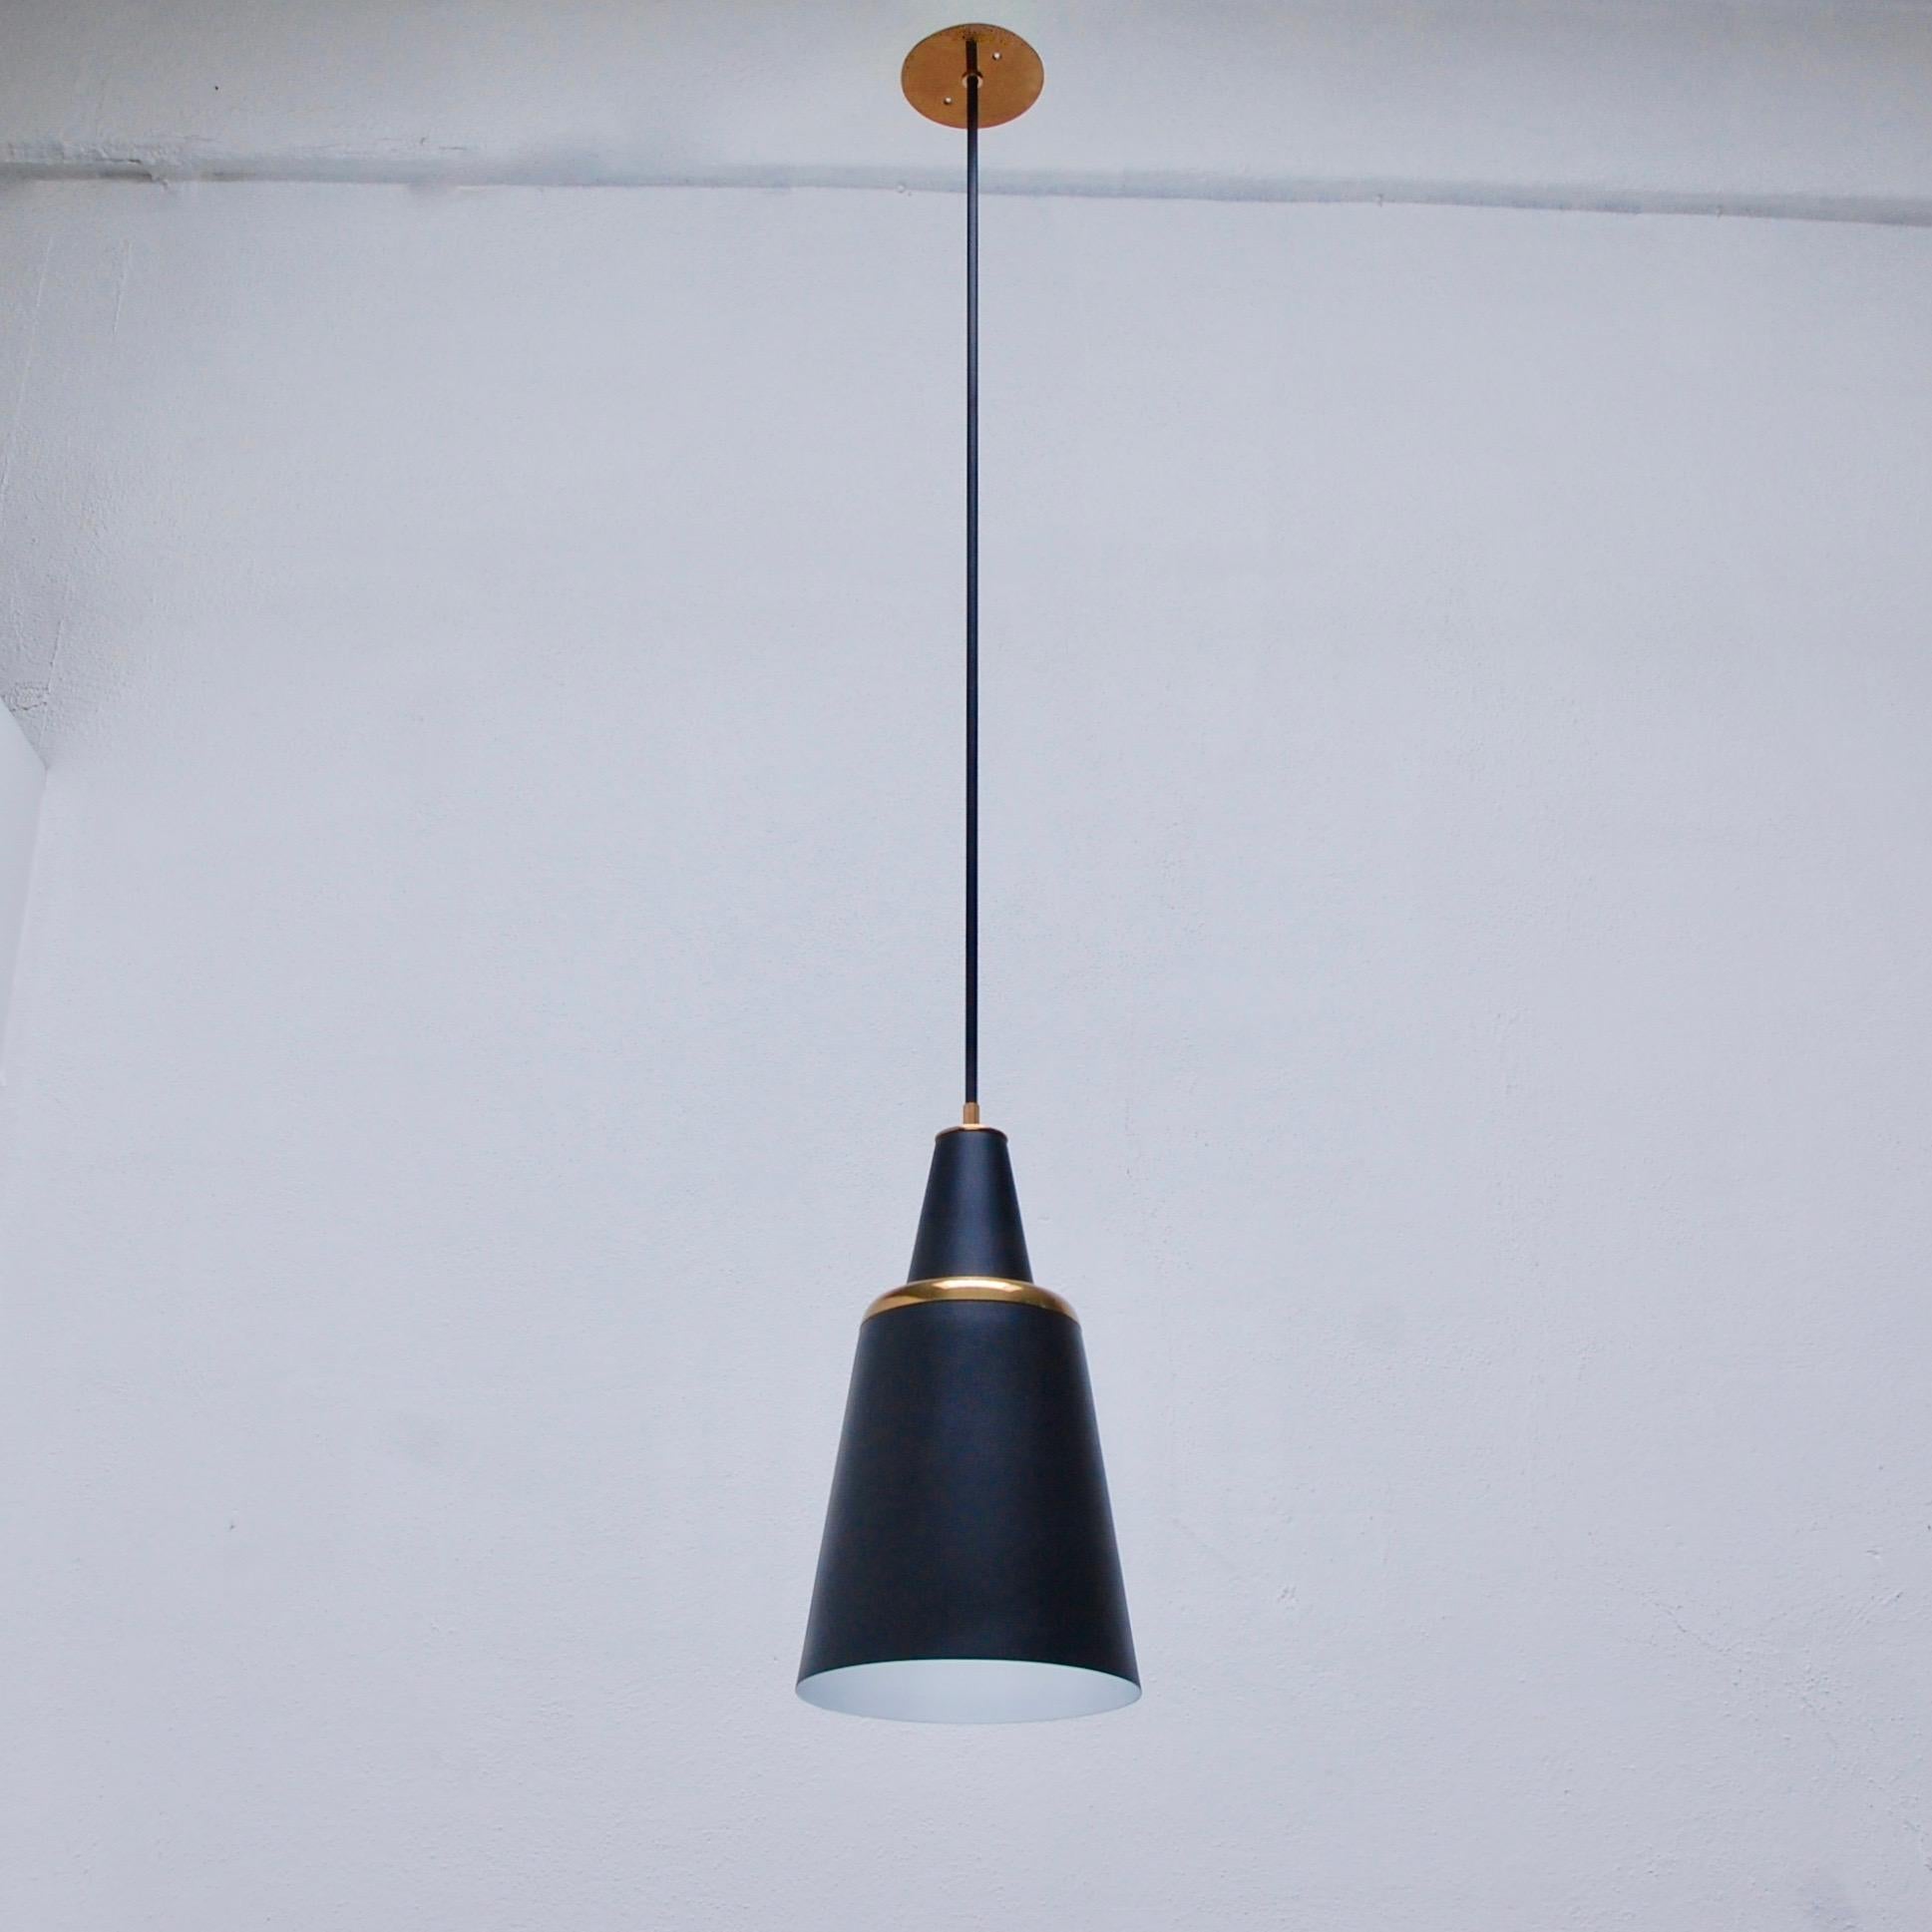 Modern LUbelle Pendant by Lumfardo Luminaires. Made to order. Brass and painted aluminum finish. Custom finish and OAD can be made upon request. Single E26 medium based light socket per shade. Priced individually. Multiples may be ordered. Light